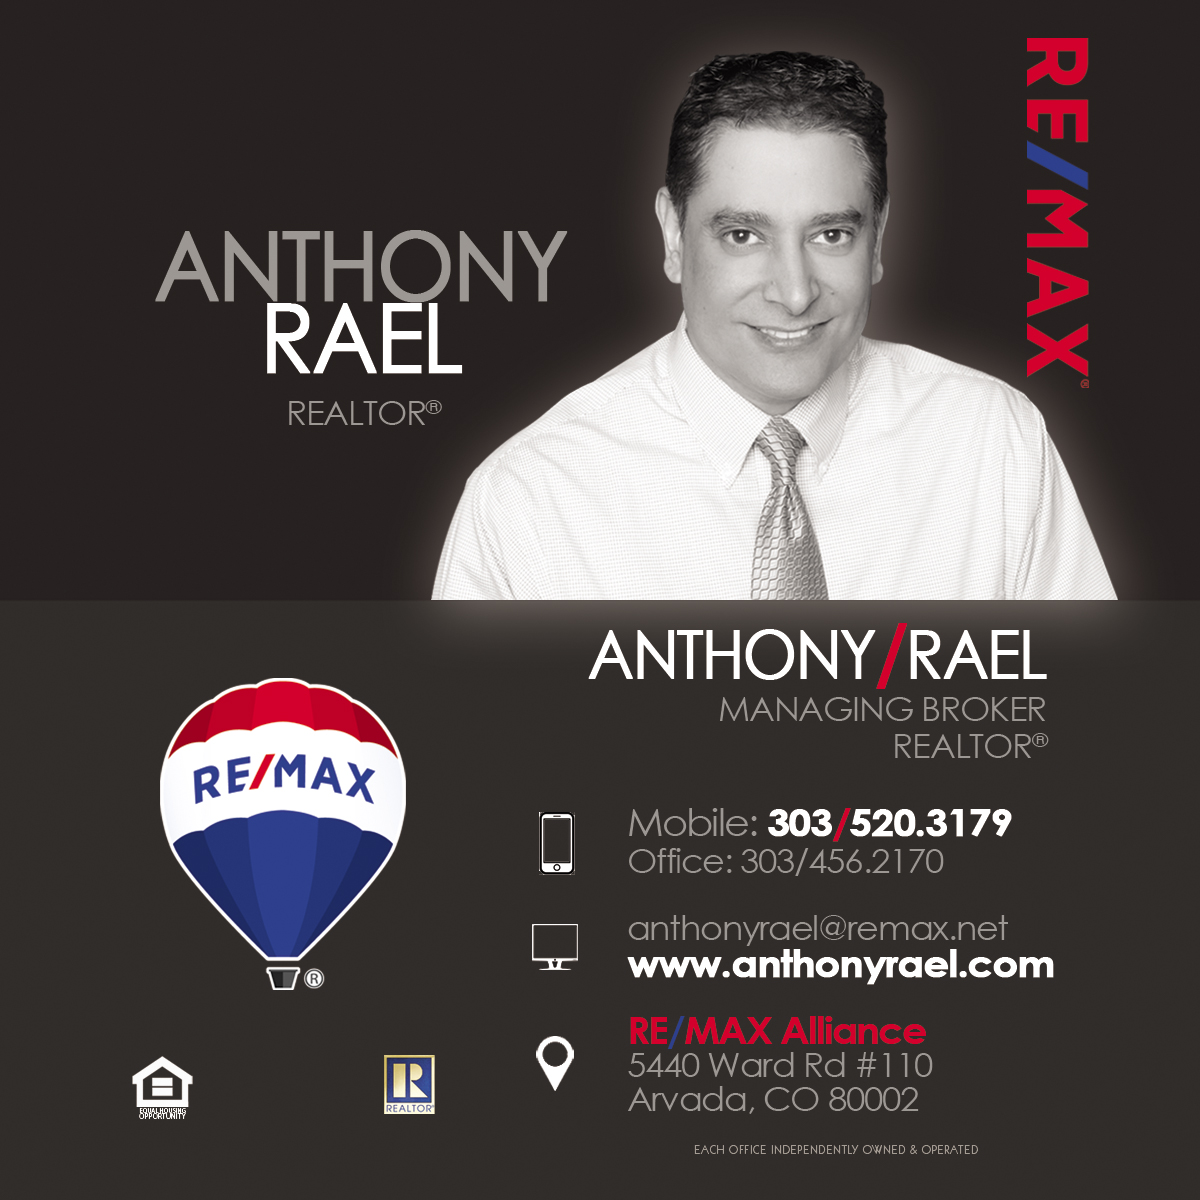 Denver REMAX Real Estate Agent Anthony Rael with RE/MAX Alliance